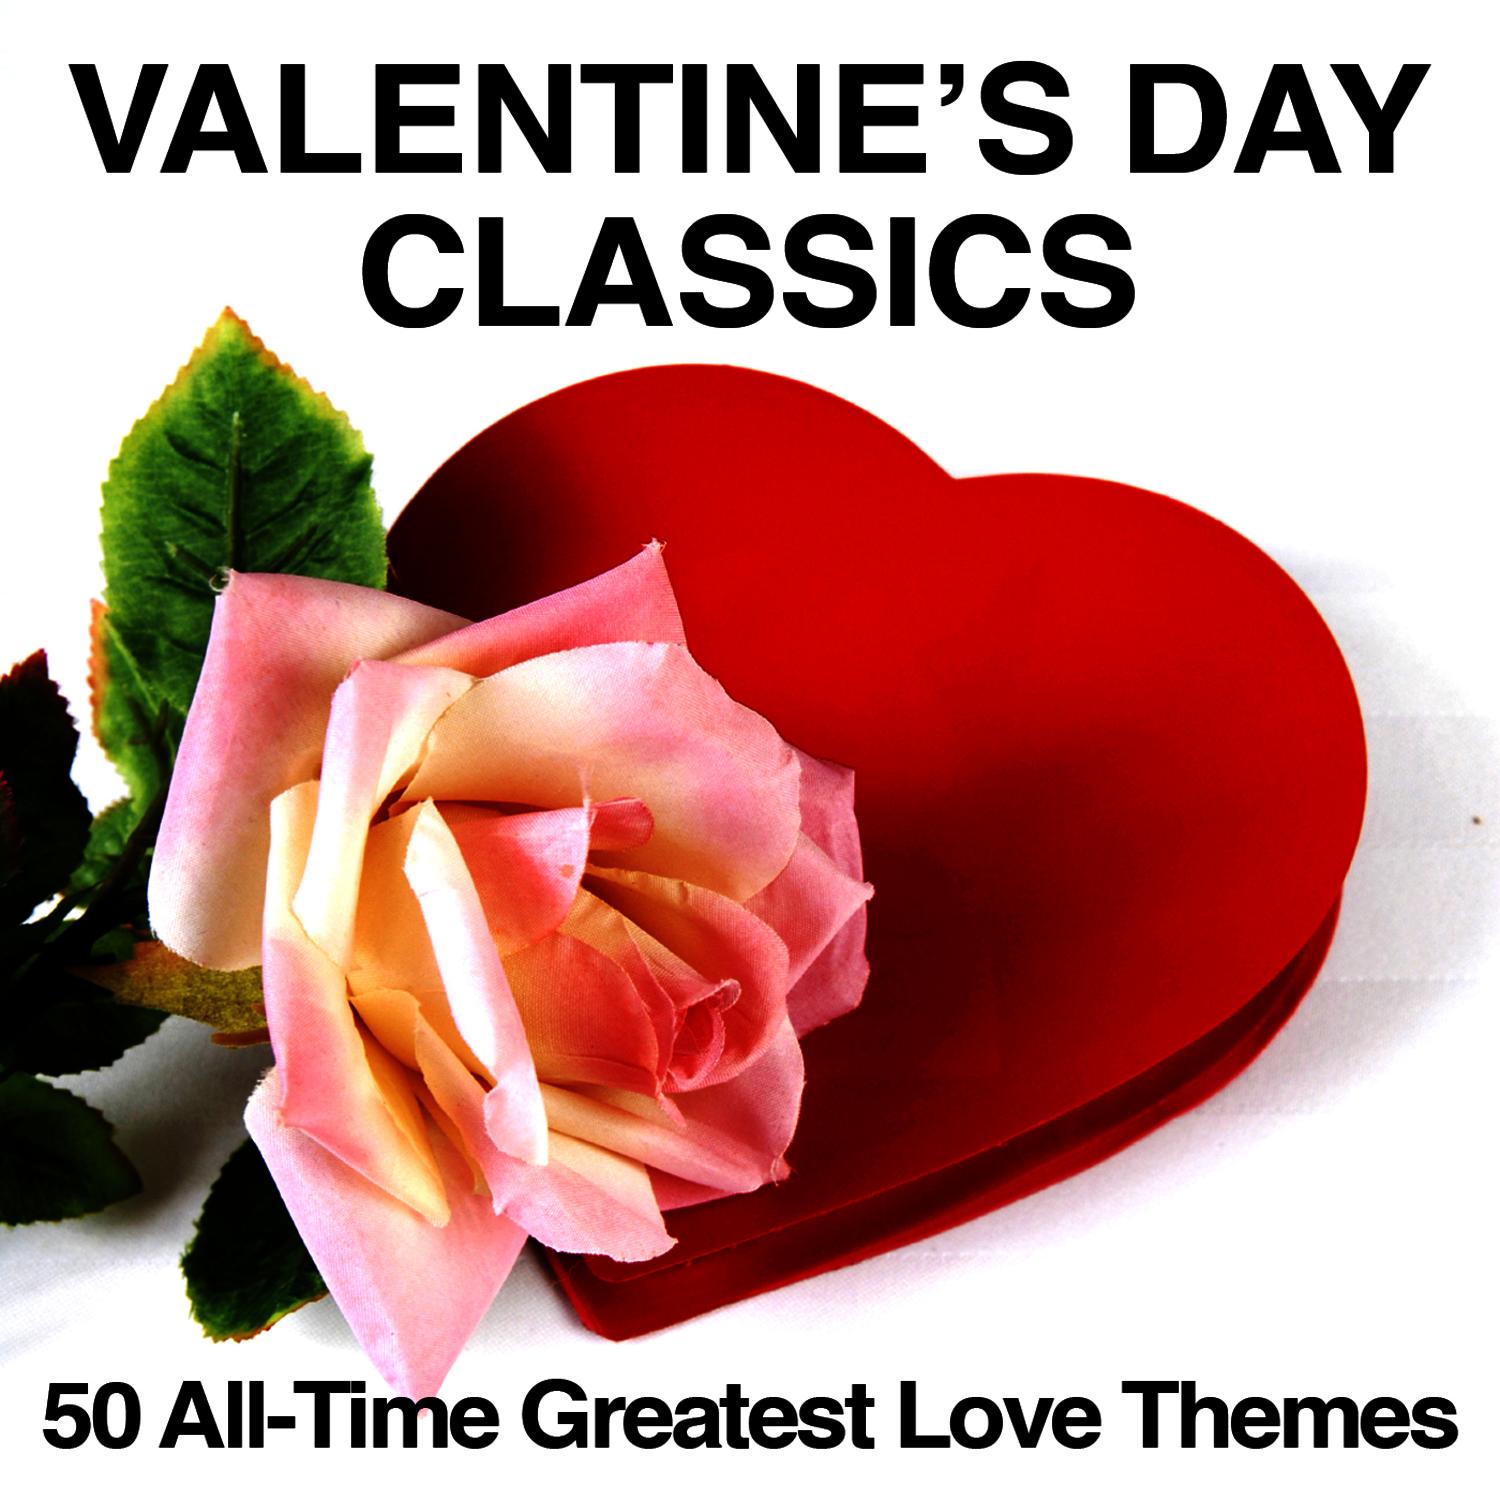 Valentine's Day Classics: 50 All-Time Greatest Love Themes